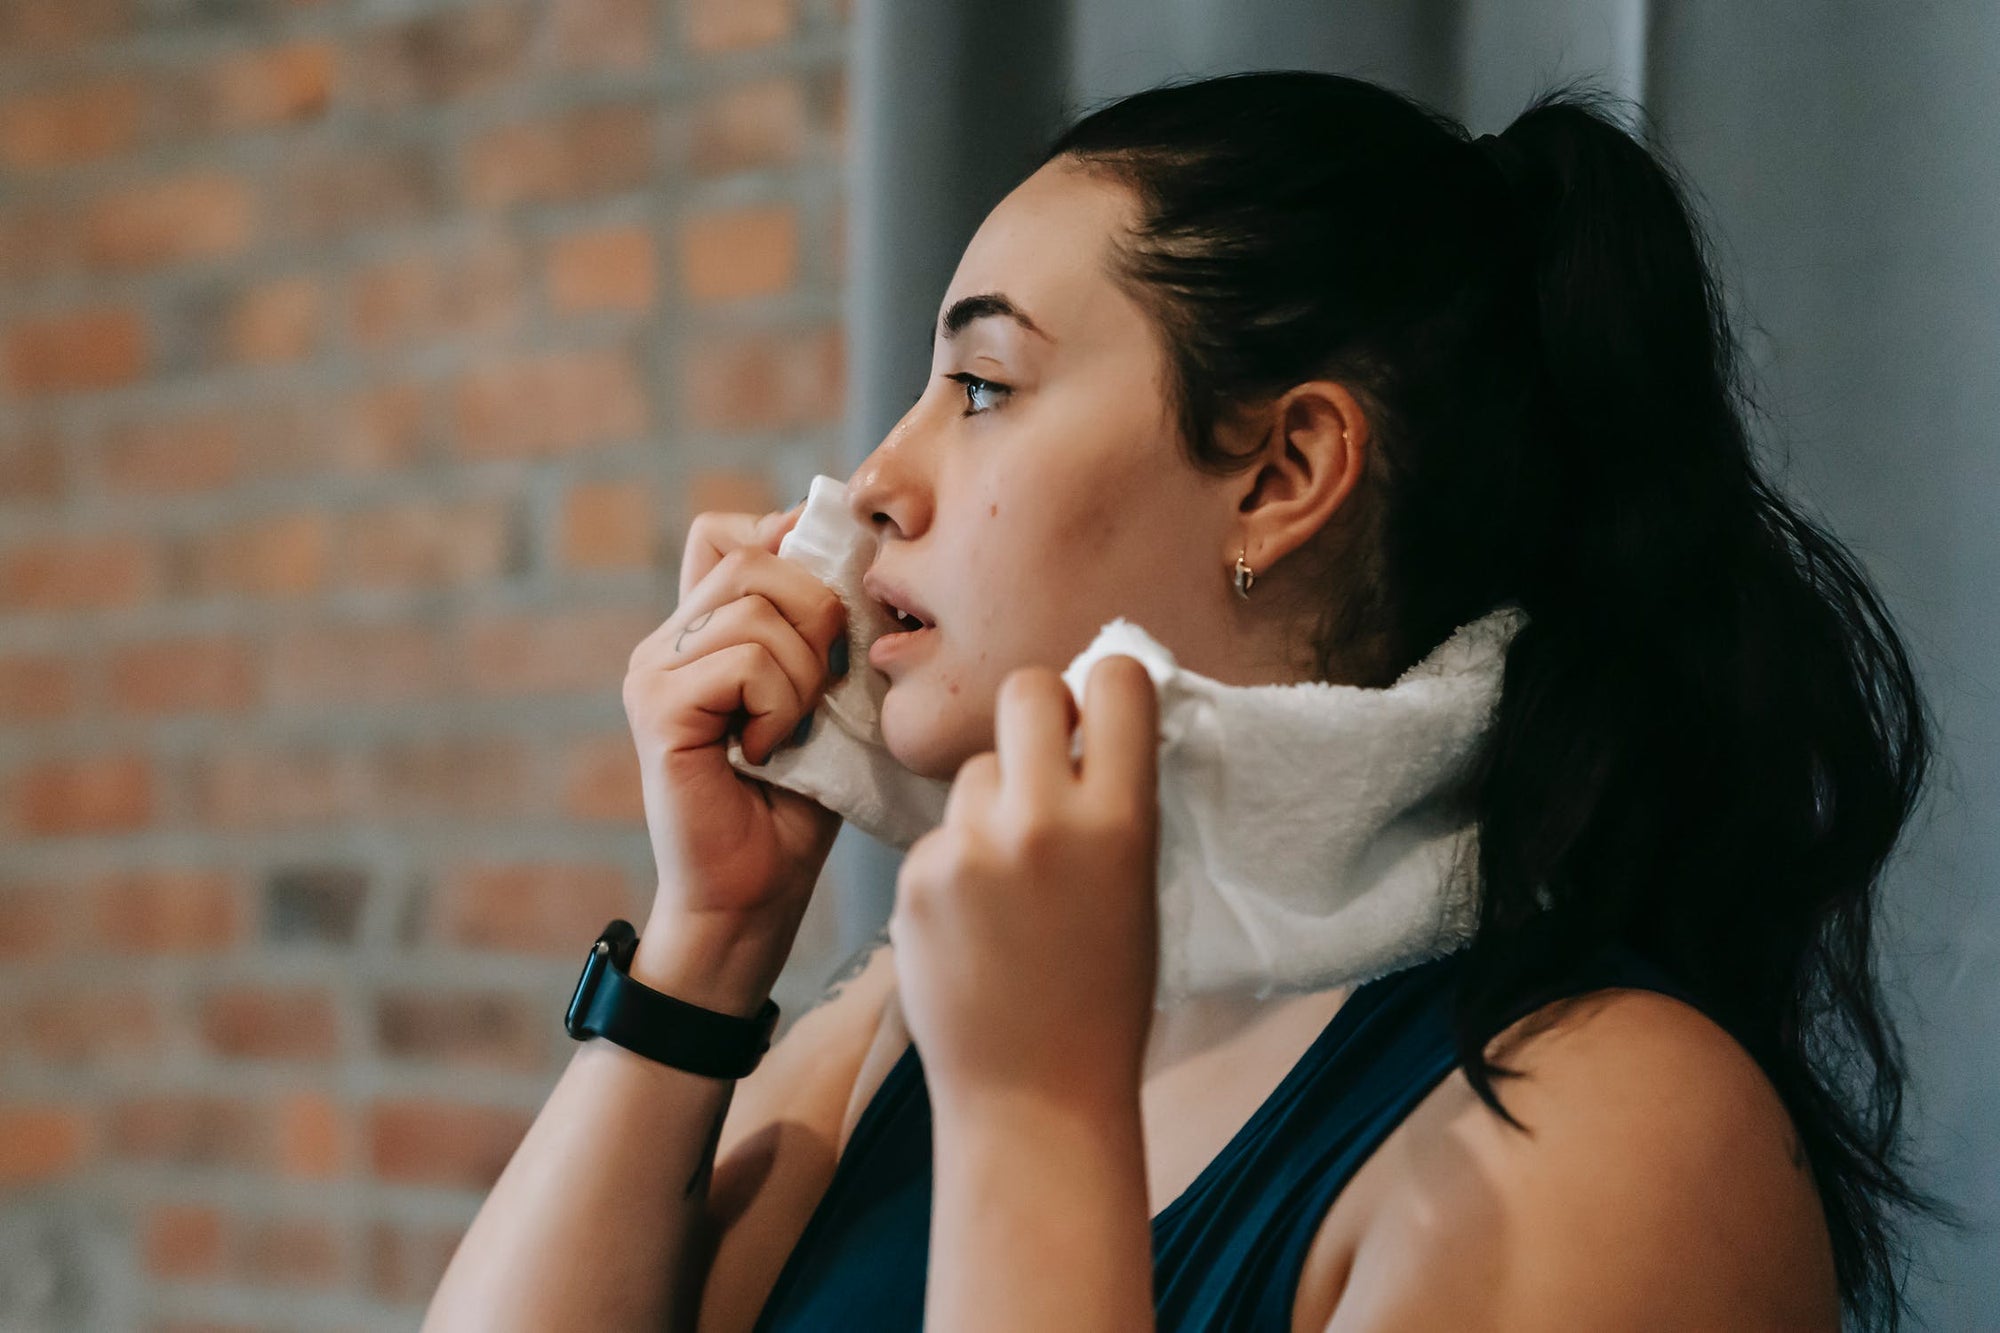 Should You Wash Face Before Workout?